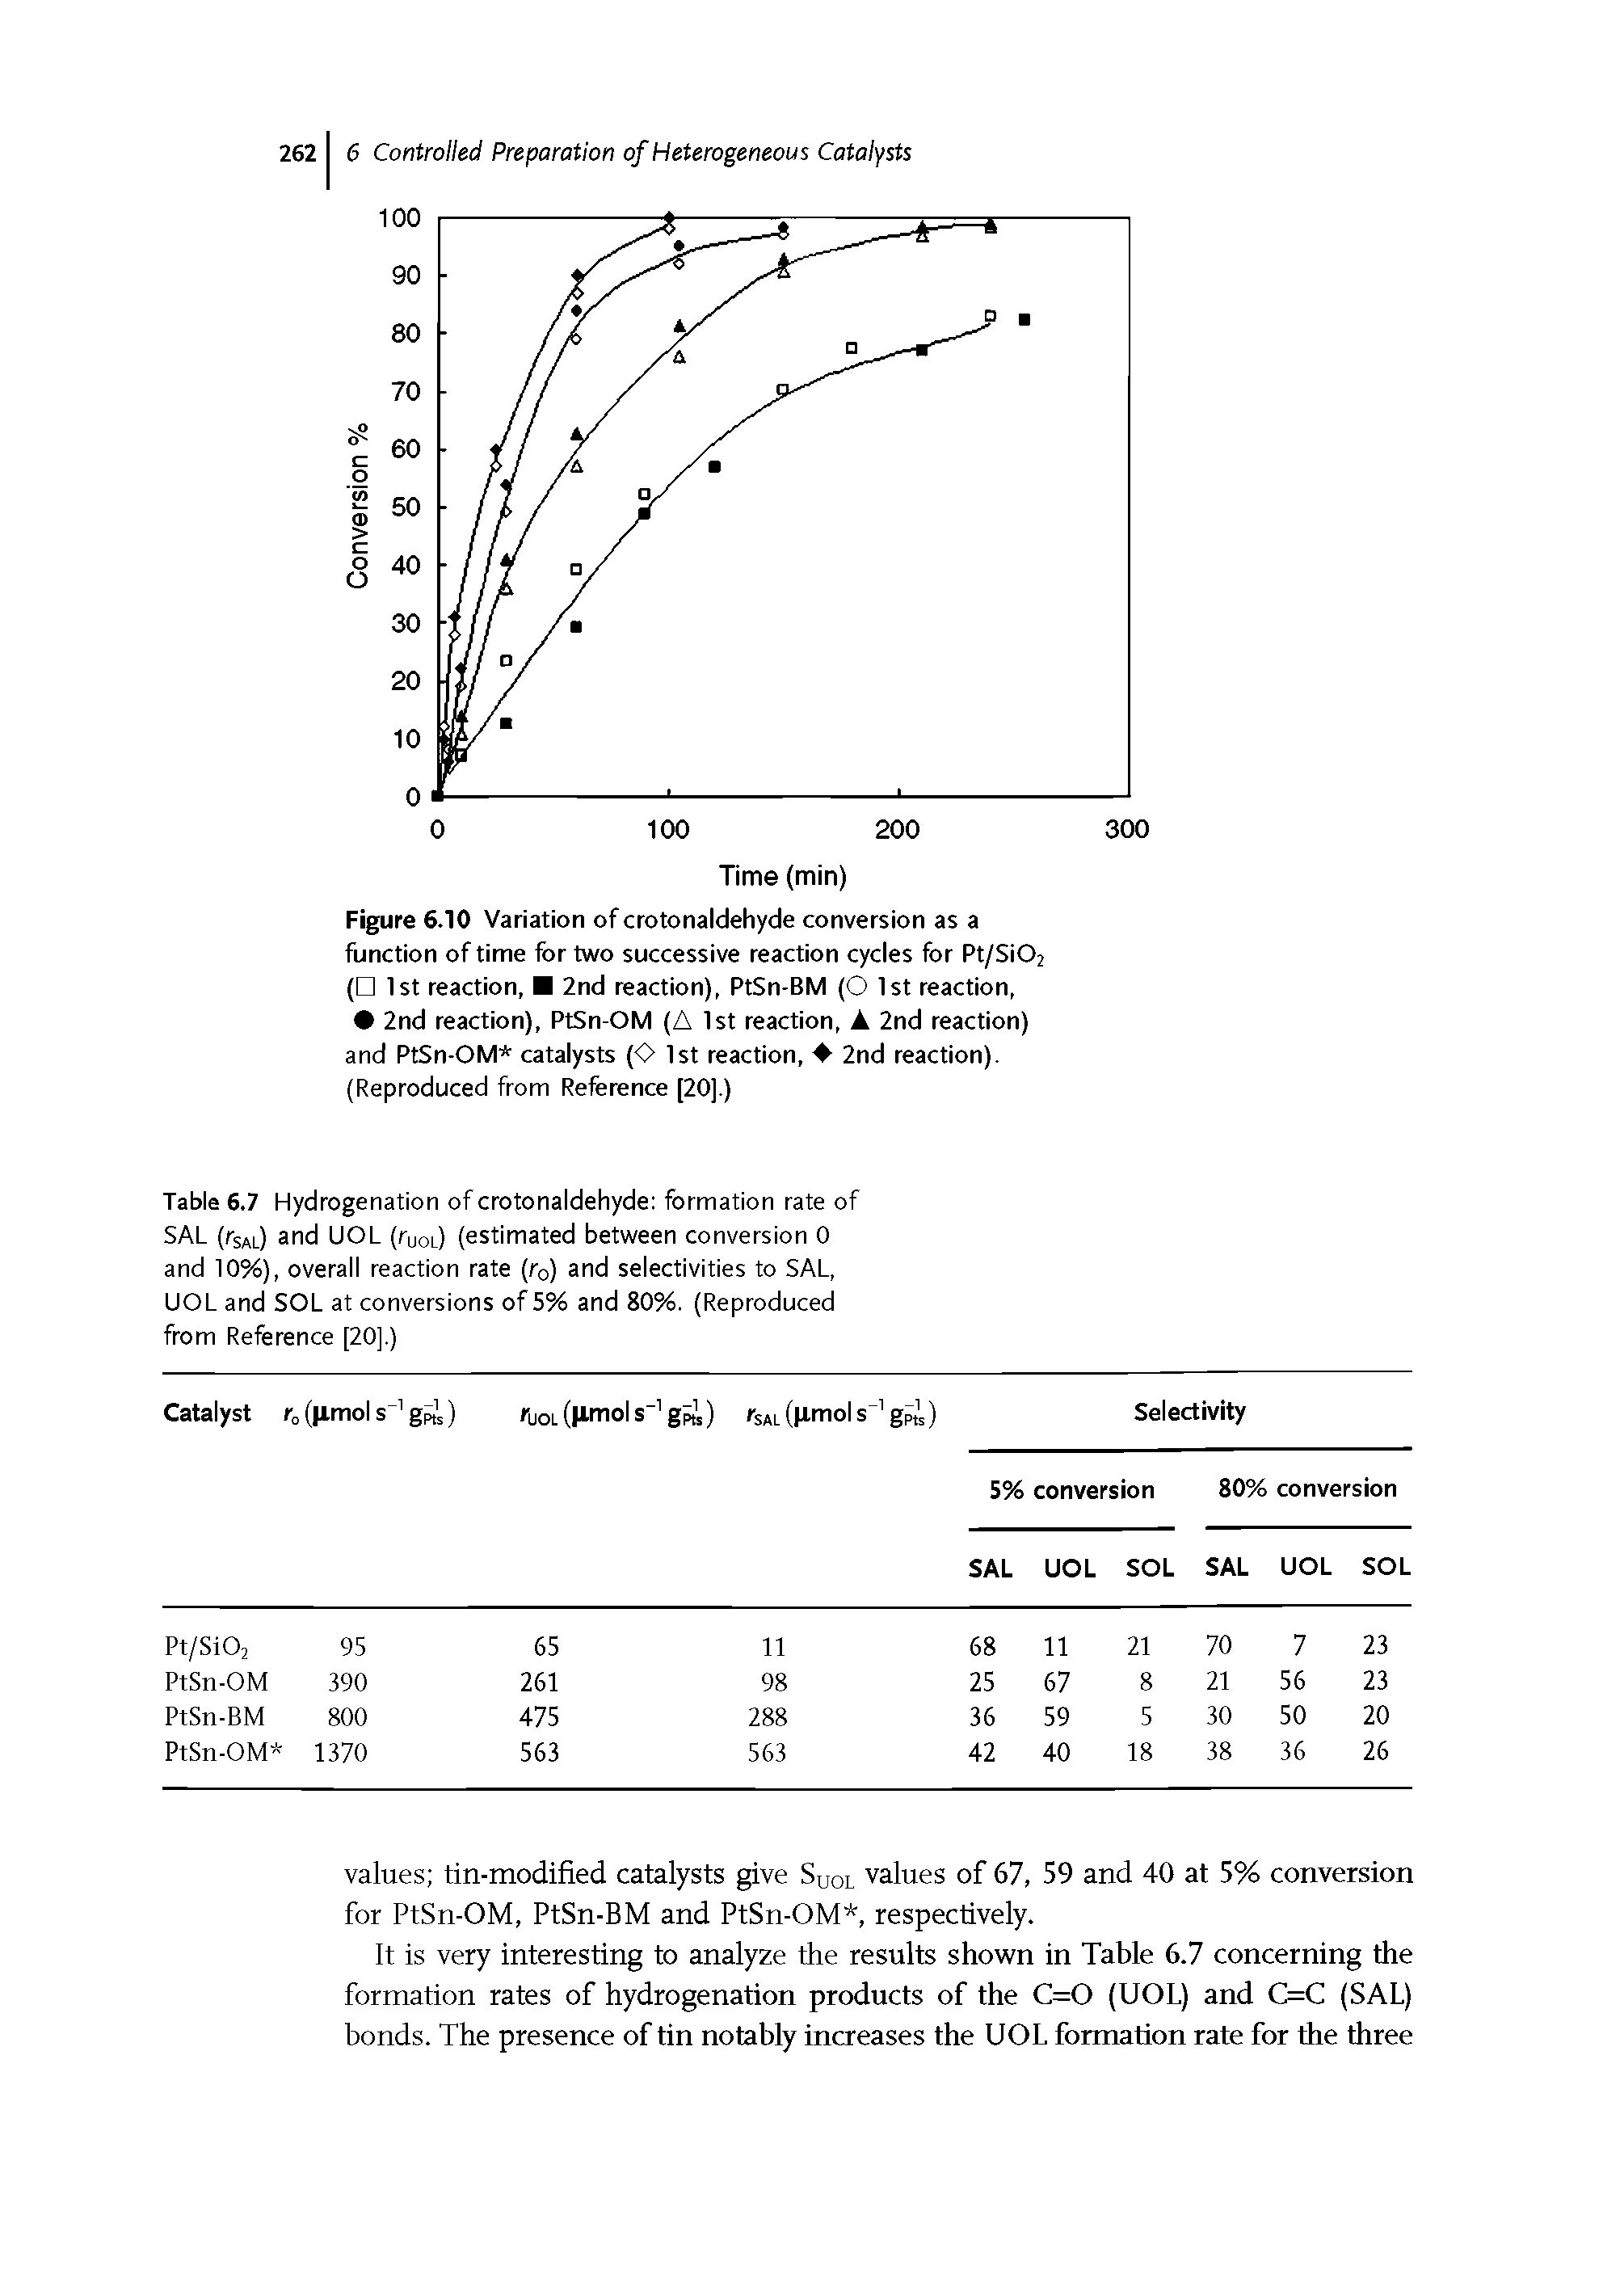 Table 6.7 Hydrogenation of crotonaldehyde formation rate of SAL (rsAL) and UOL (ruor) (estimated between conversion 0 and 10%), overall reaction rate (ro) and selectivities to SAL,...